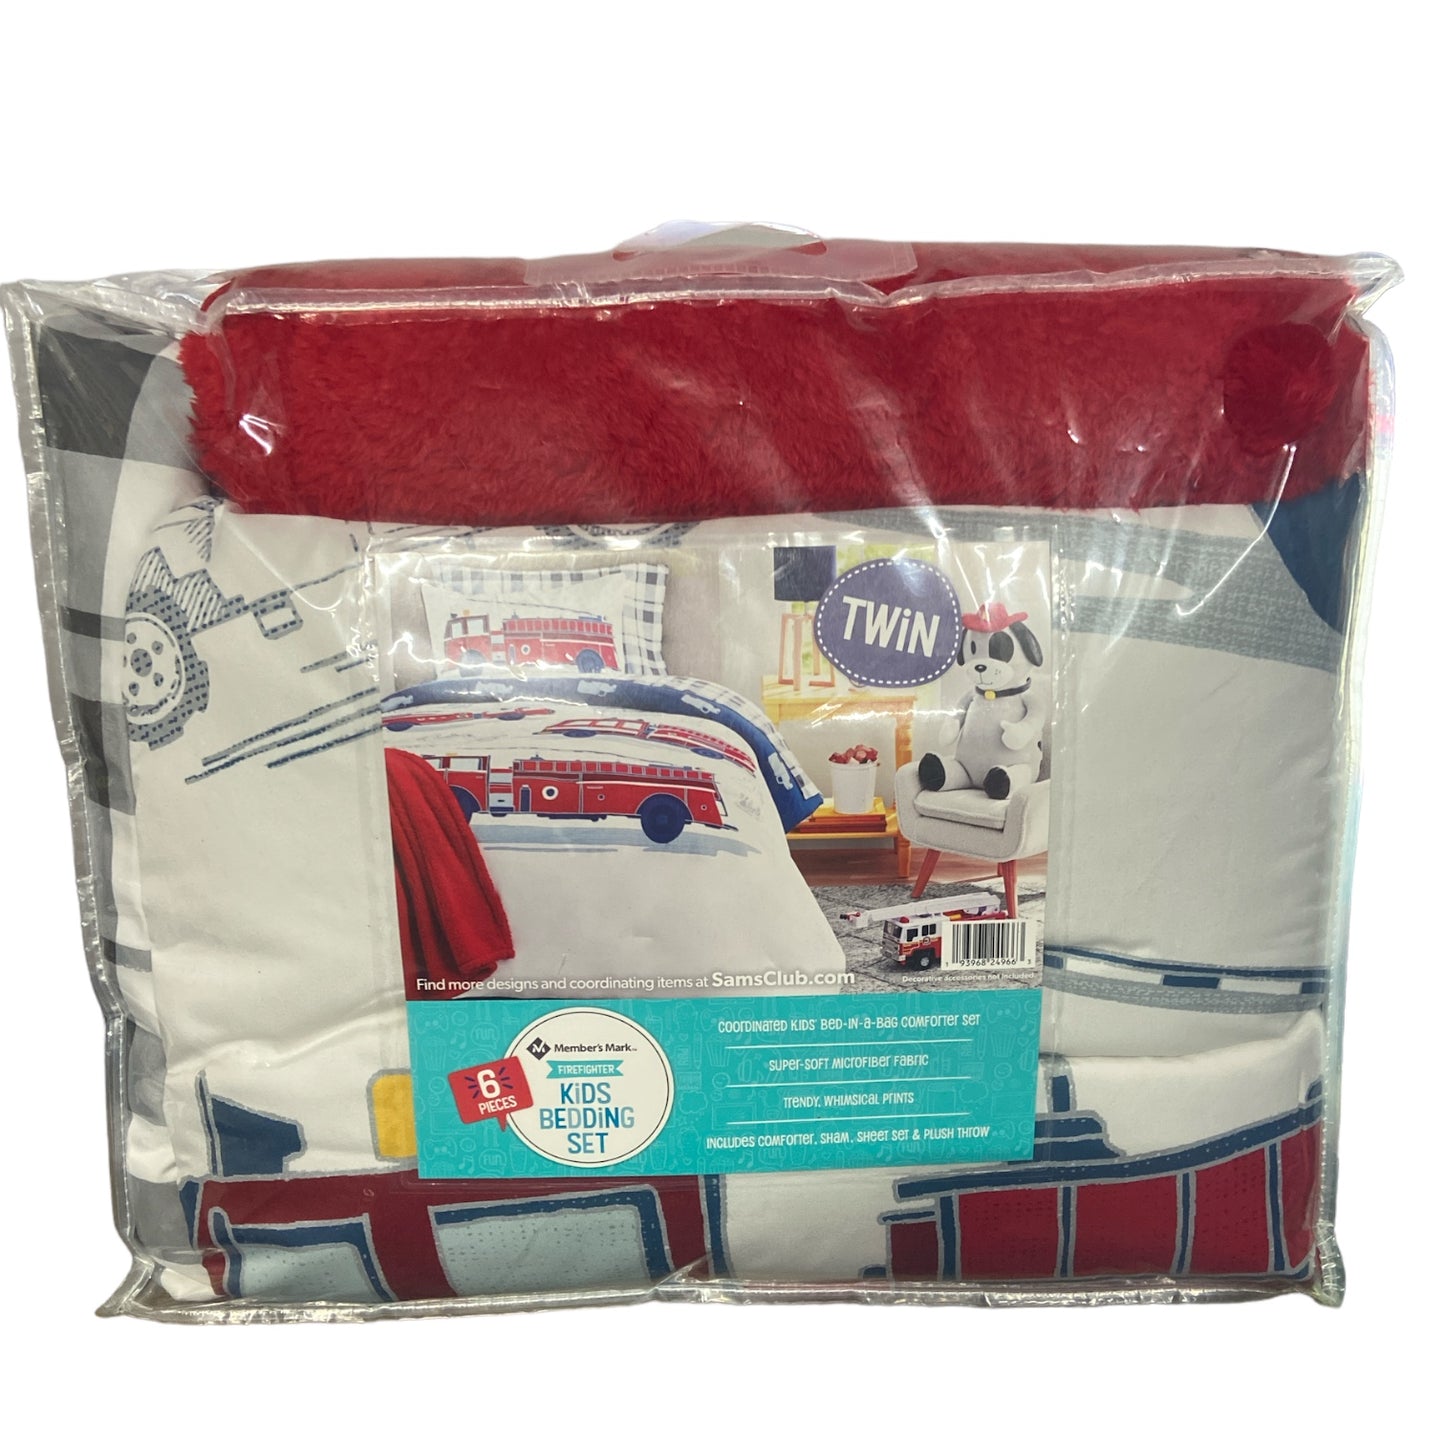 Member's Mark Kids Bed in a Bag, Firefighter, 6 piece set, including Plush Throw